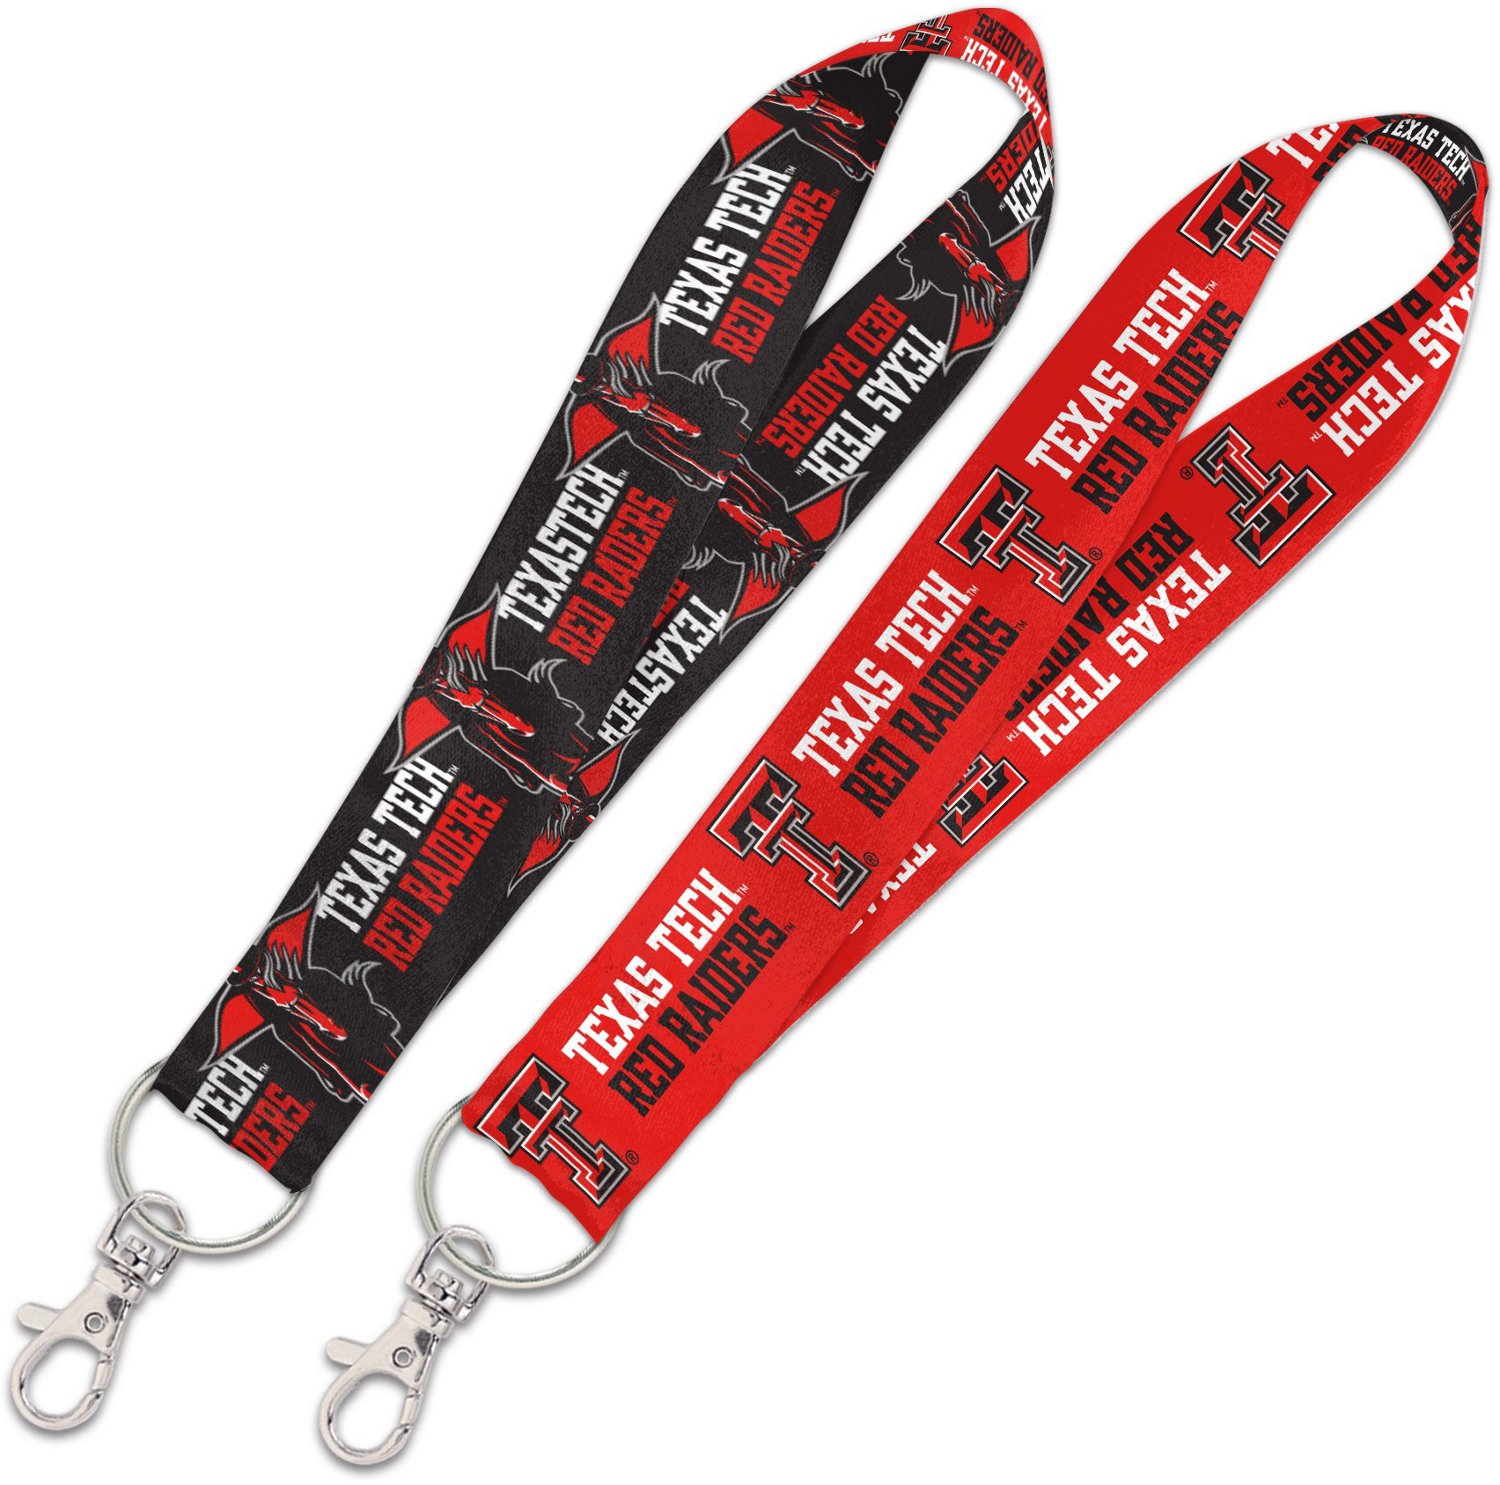 WinCraft Texas Tech University Lanyard Key Strap                                                                                 - view number 1 selected